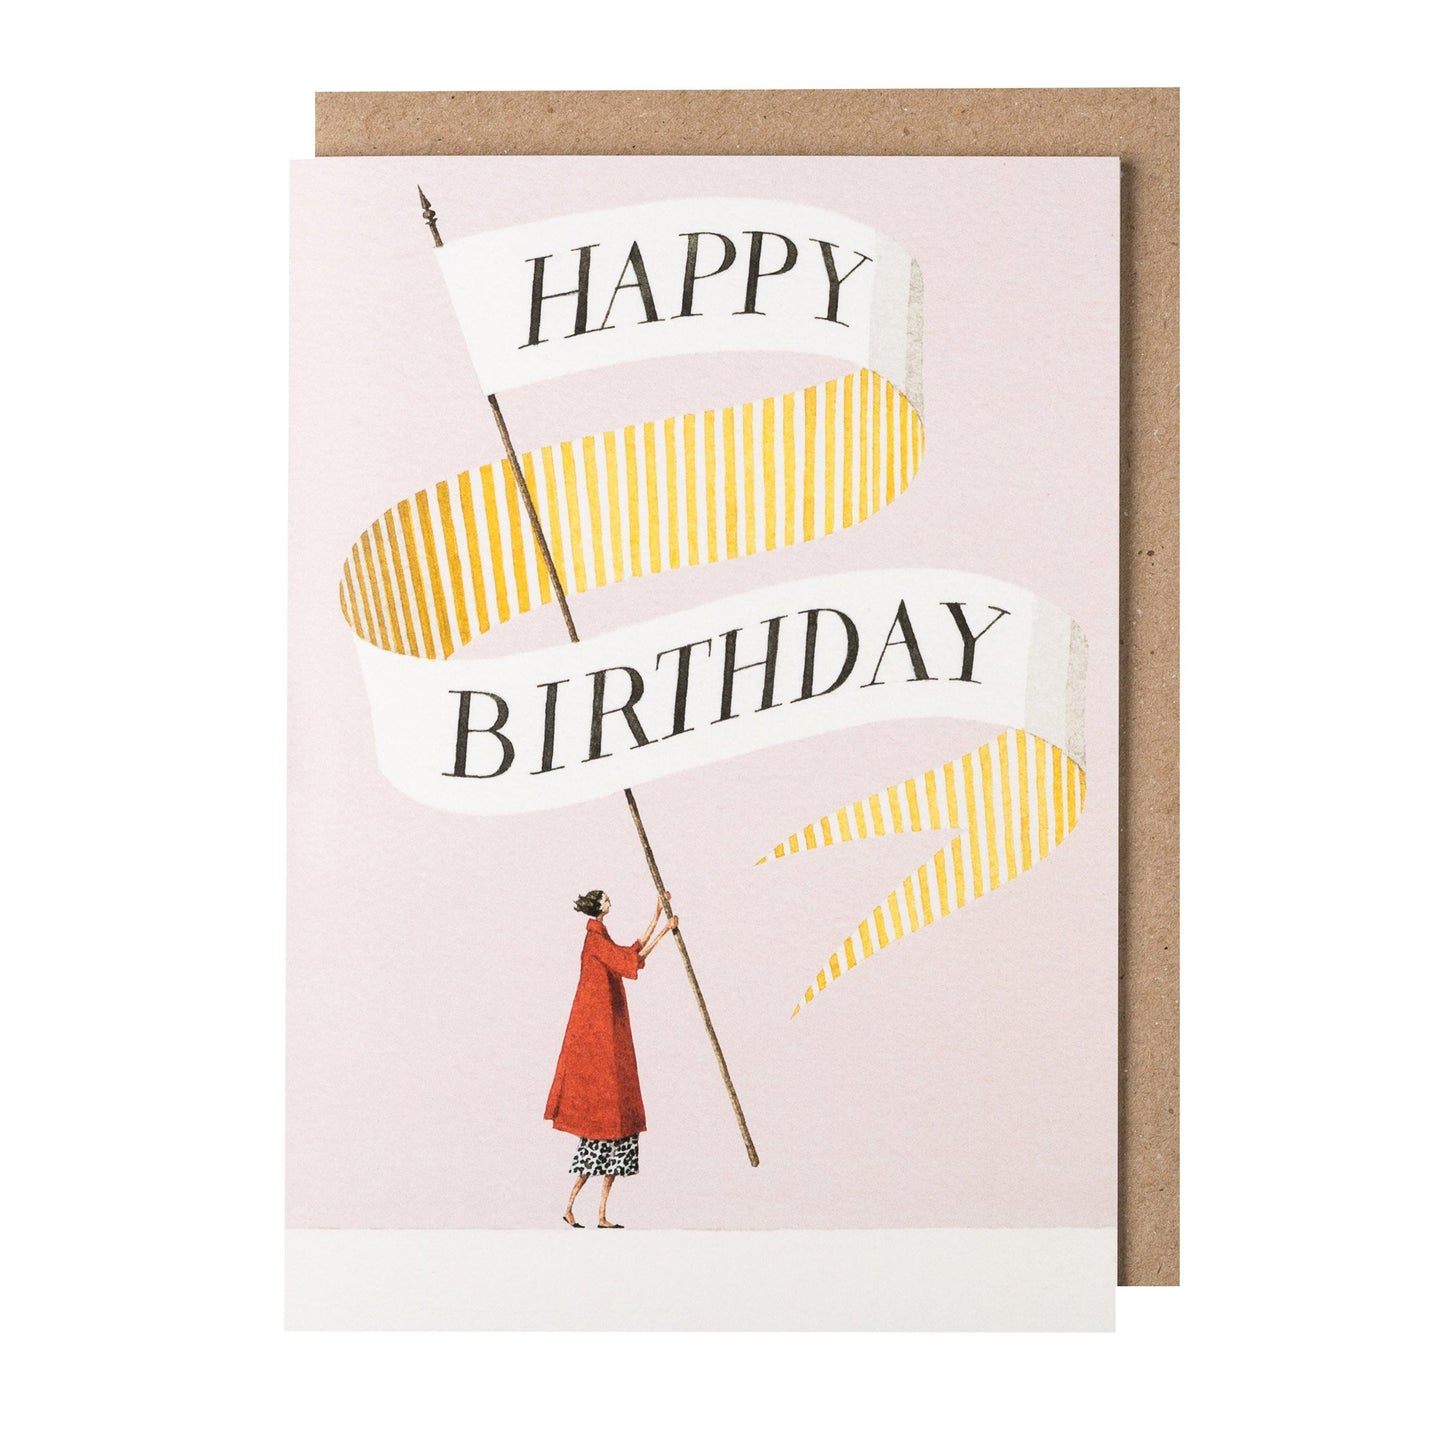 environmentally sustainable paper, compostable packaging, recycled paper, made in england, illustration, happy birthday, lady